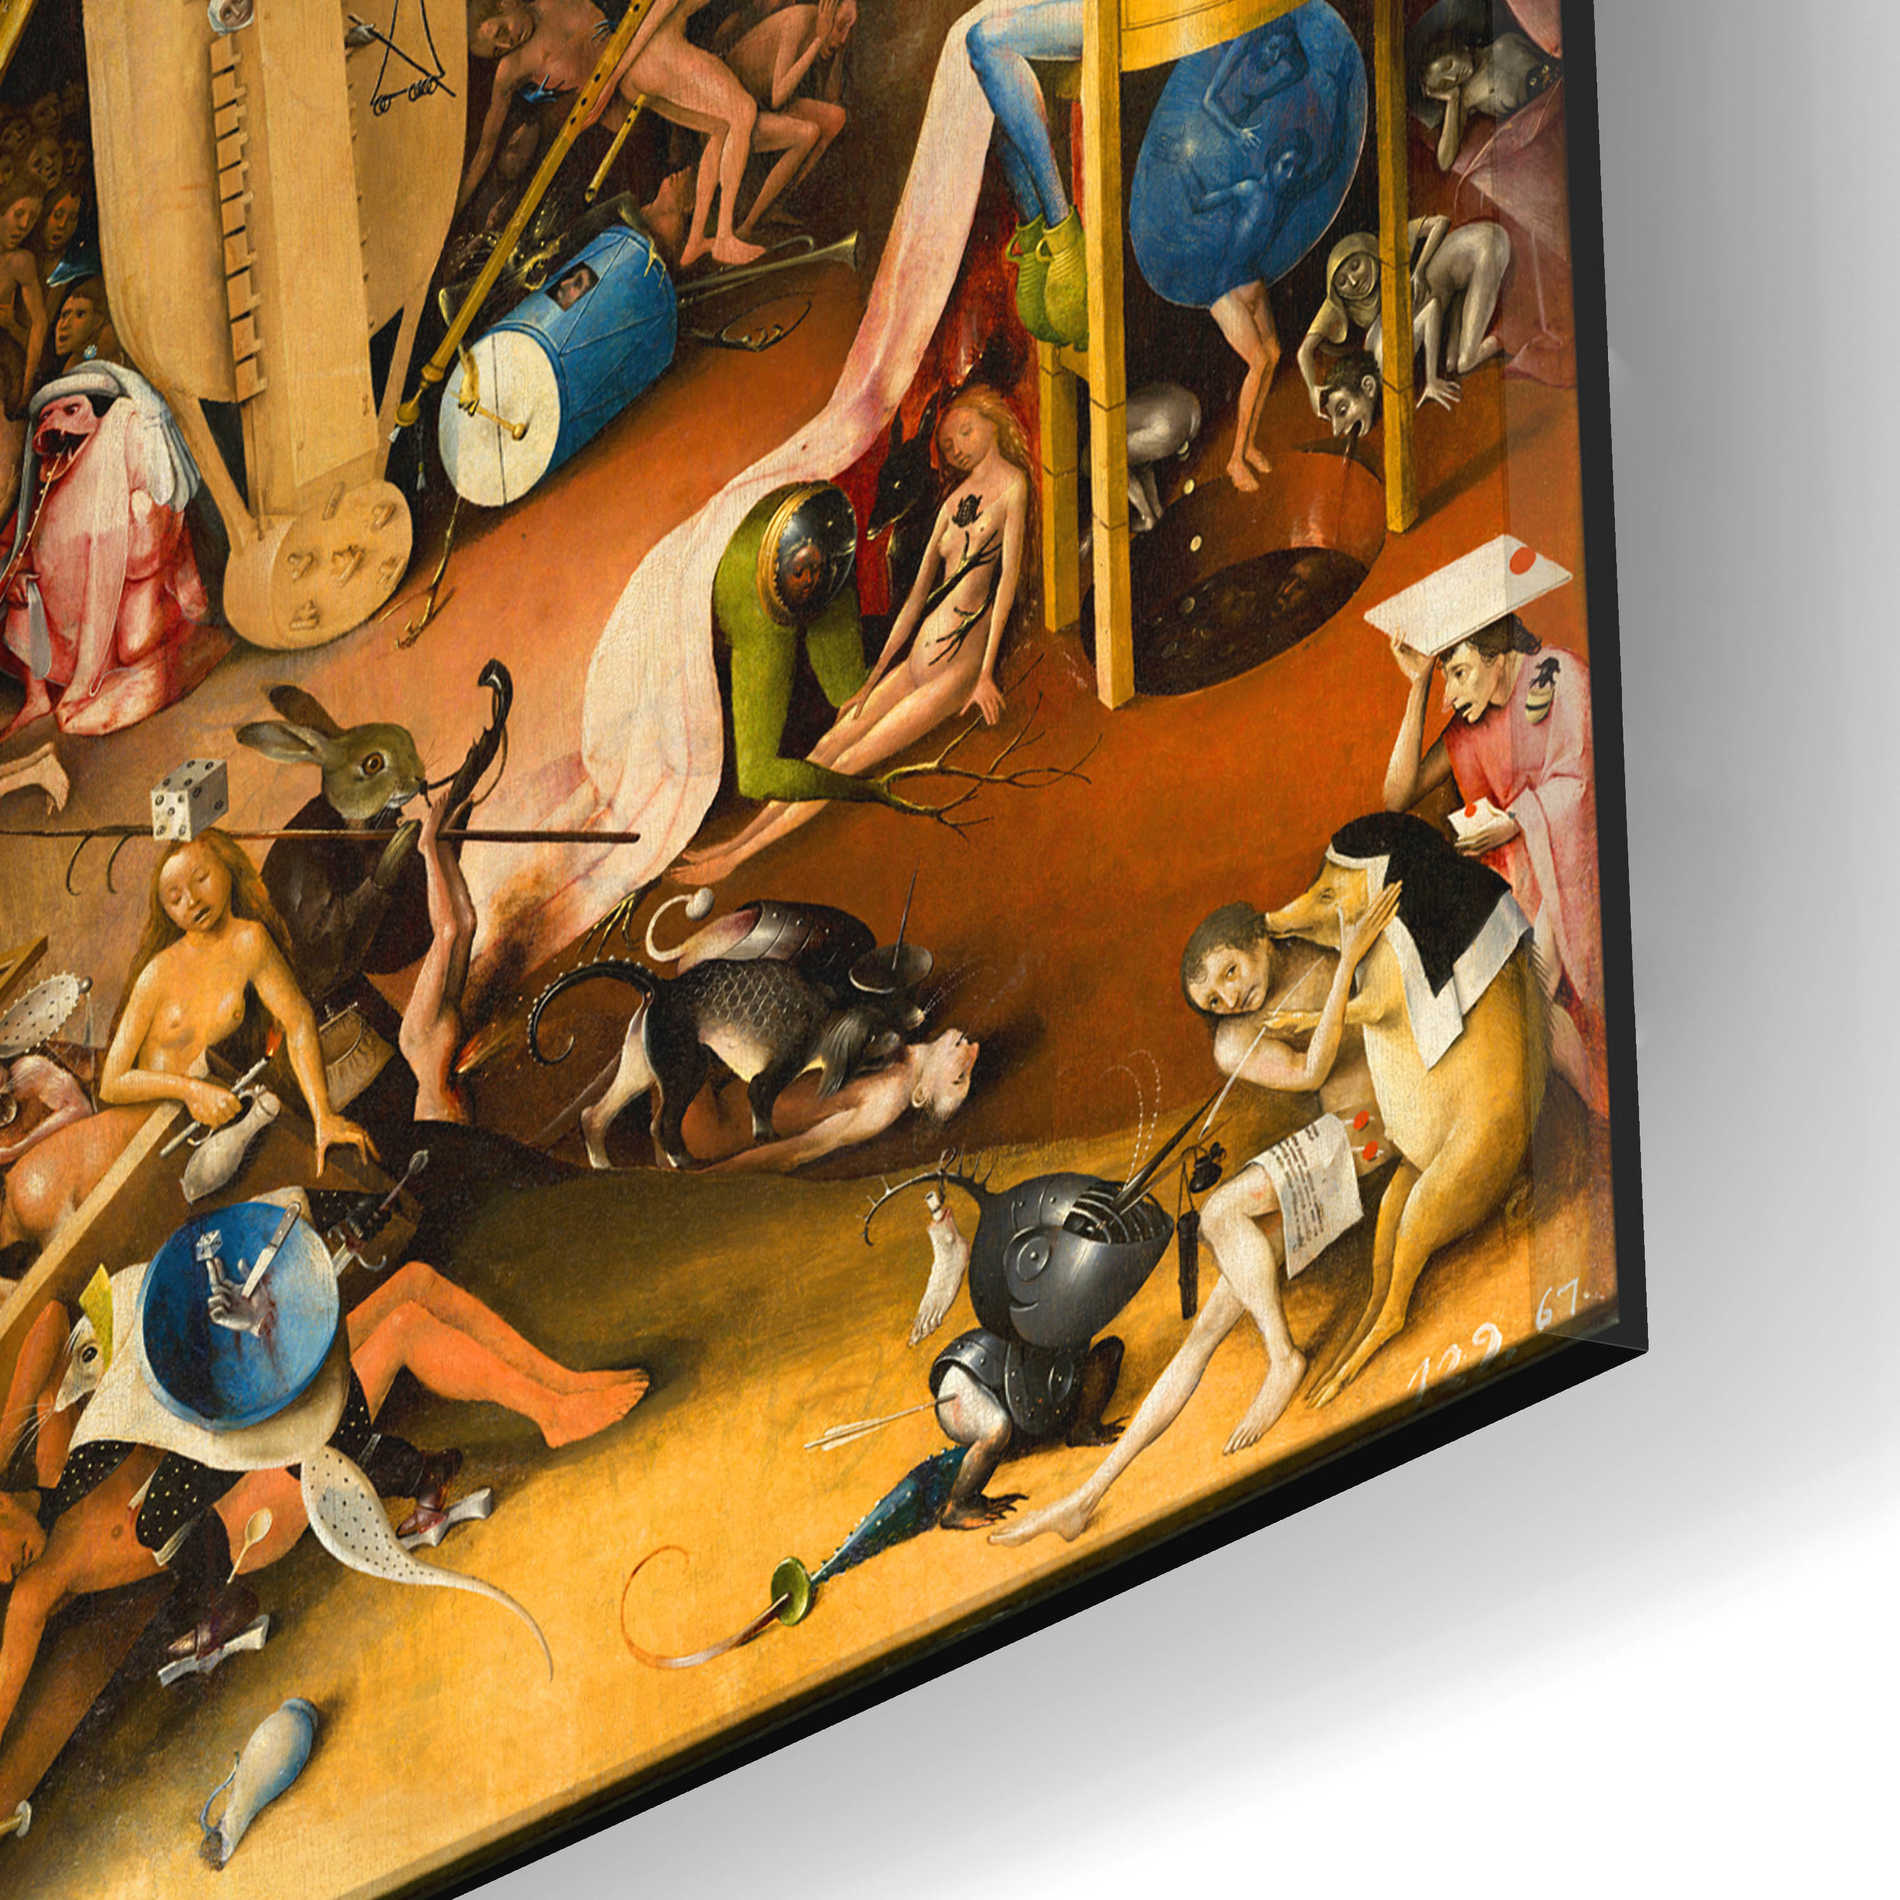 Epic Art 'The Garden of Earthly Delights - Triptych' by Hieronymus Bosch, Acrylic Glass Wall Art,24x12